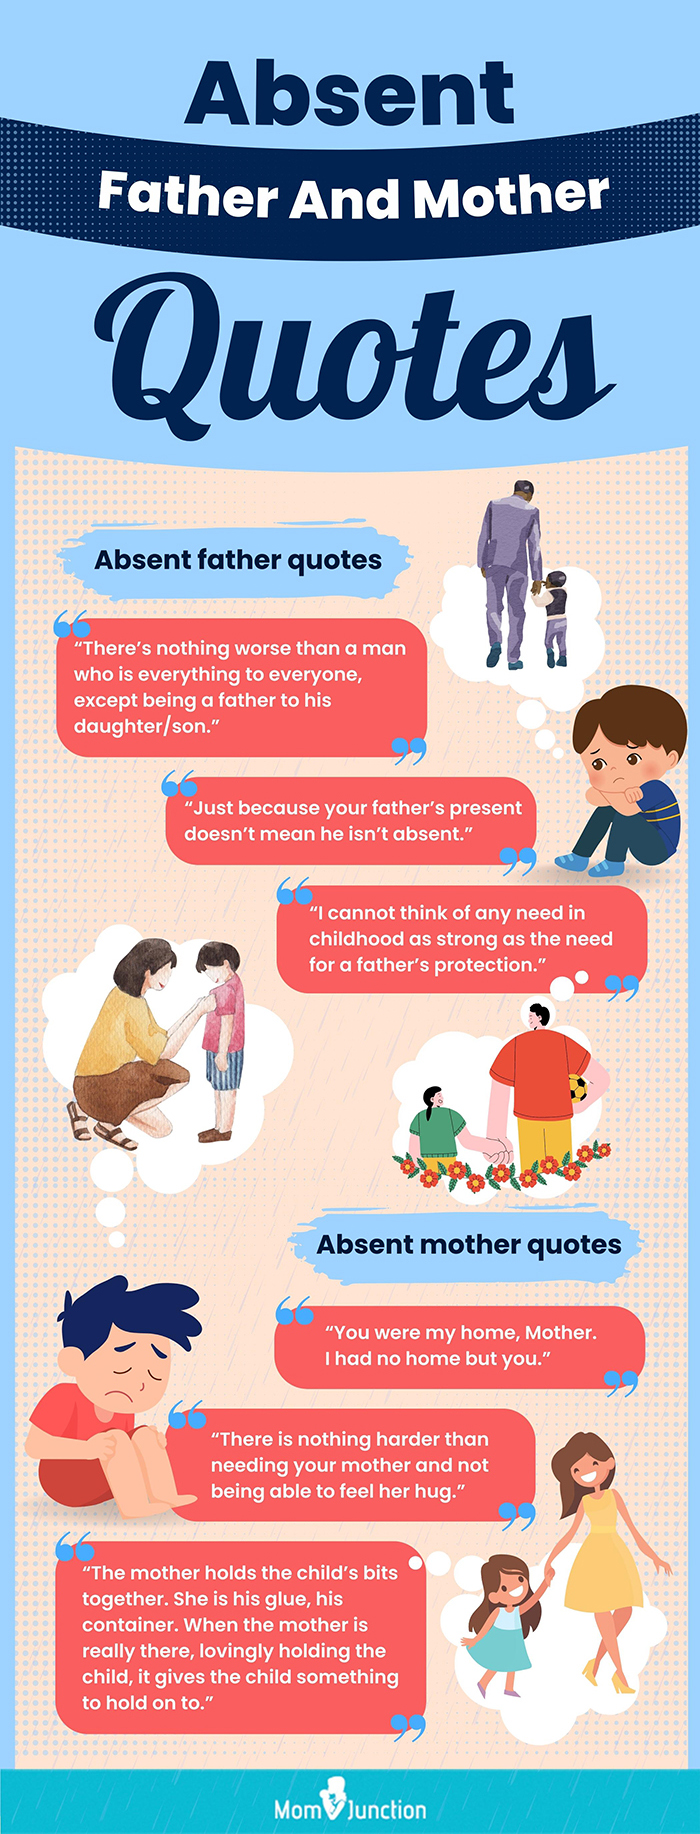 absent father and mother quotes (infographic)